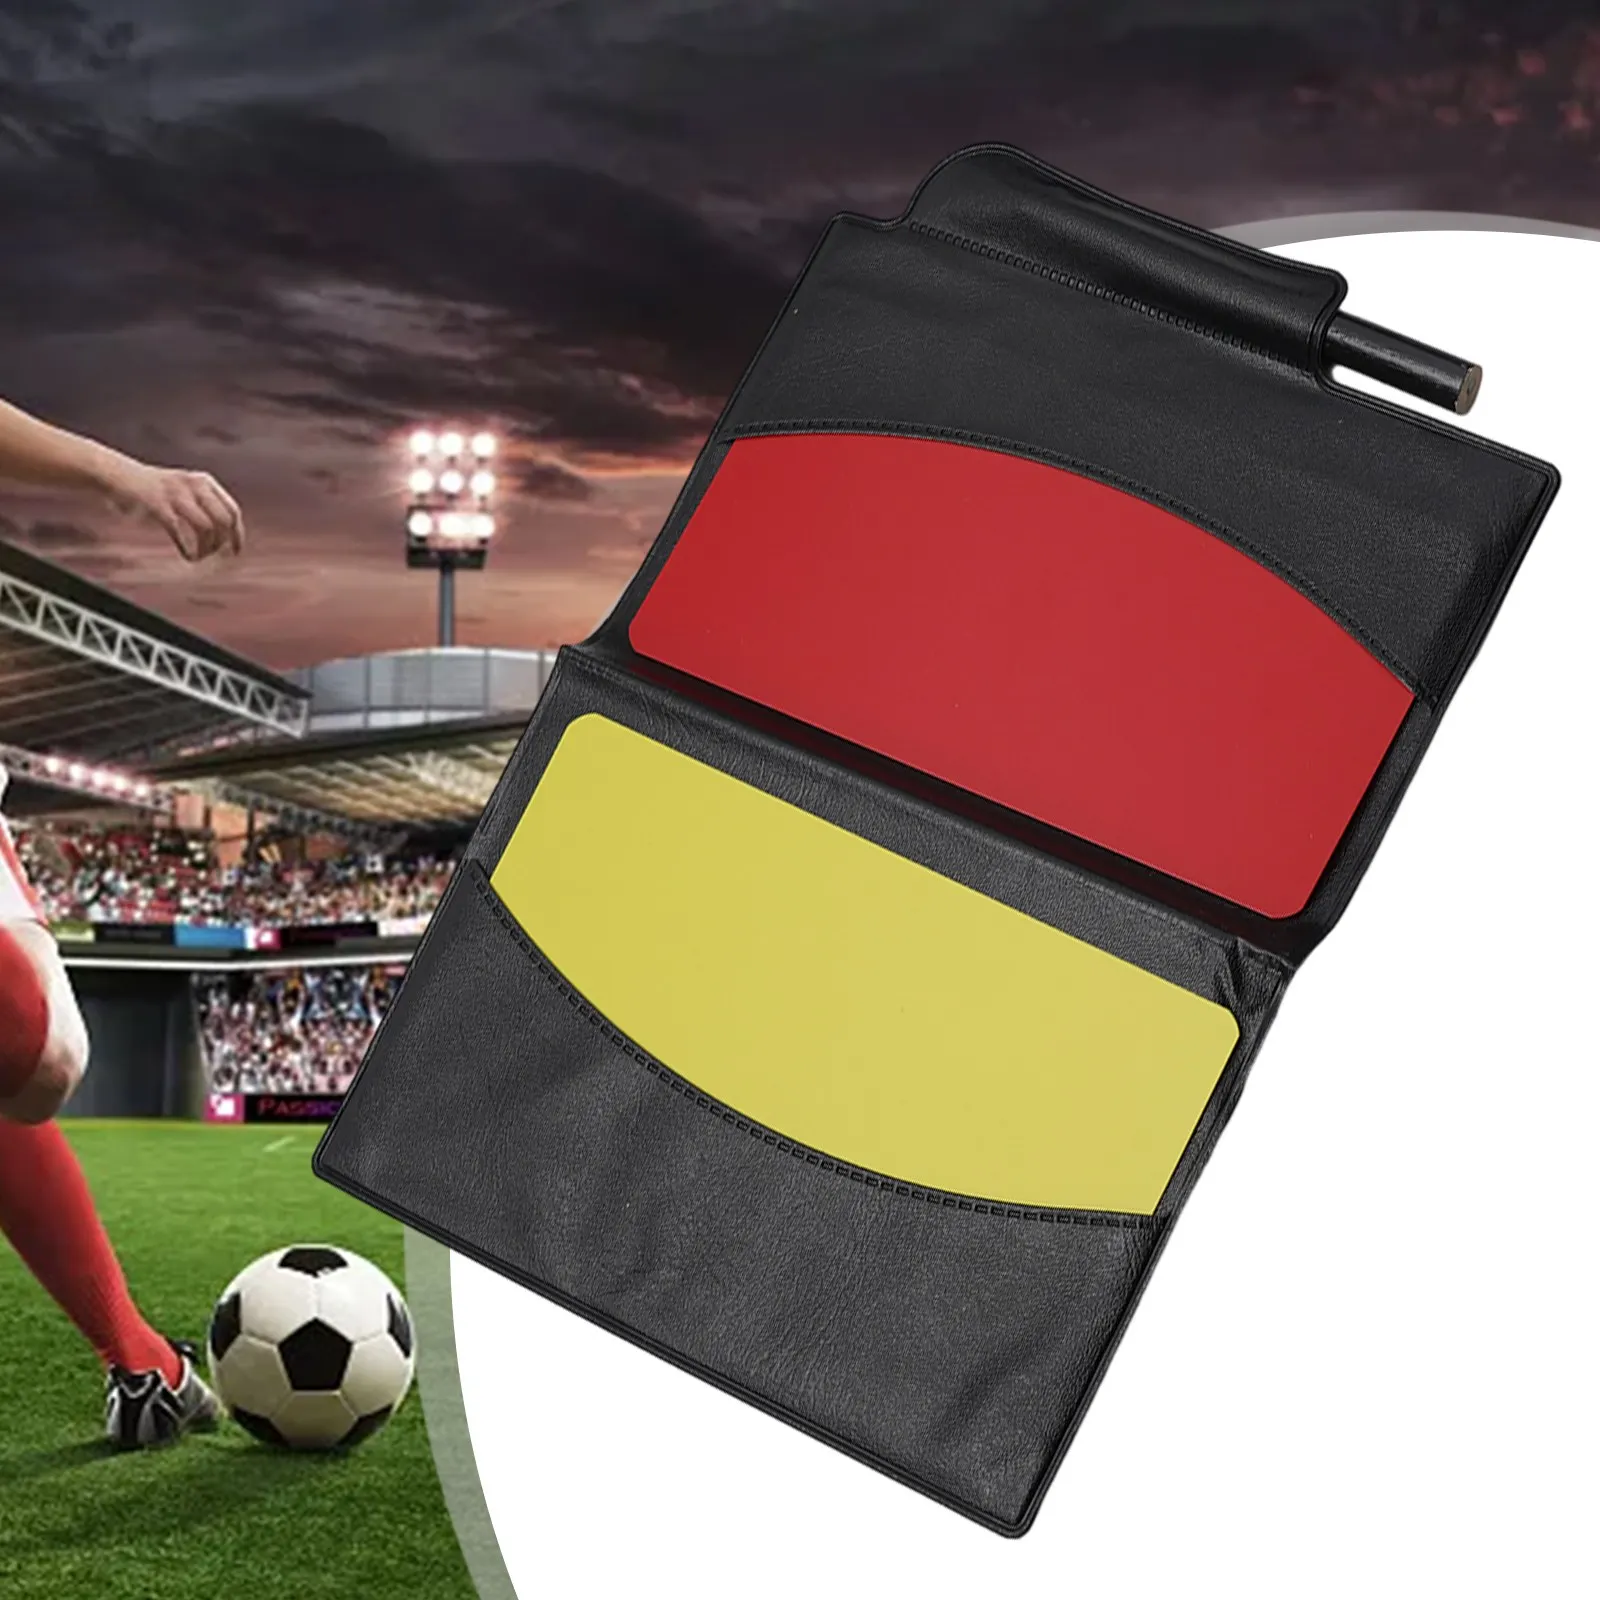 

1pc Soccer Football Referee Wallet Notebook With Red Card And Yellow Card Gadget For Football Referees 11*8cm